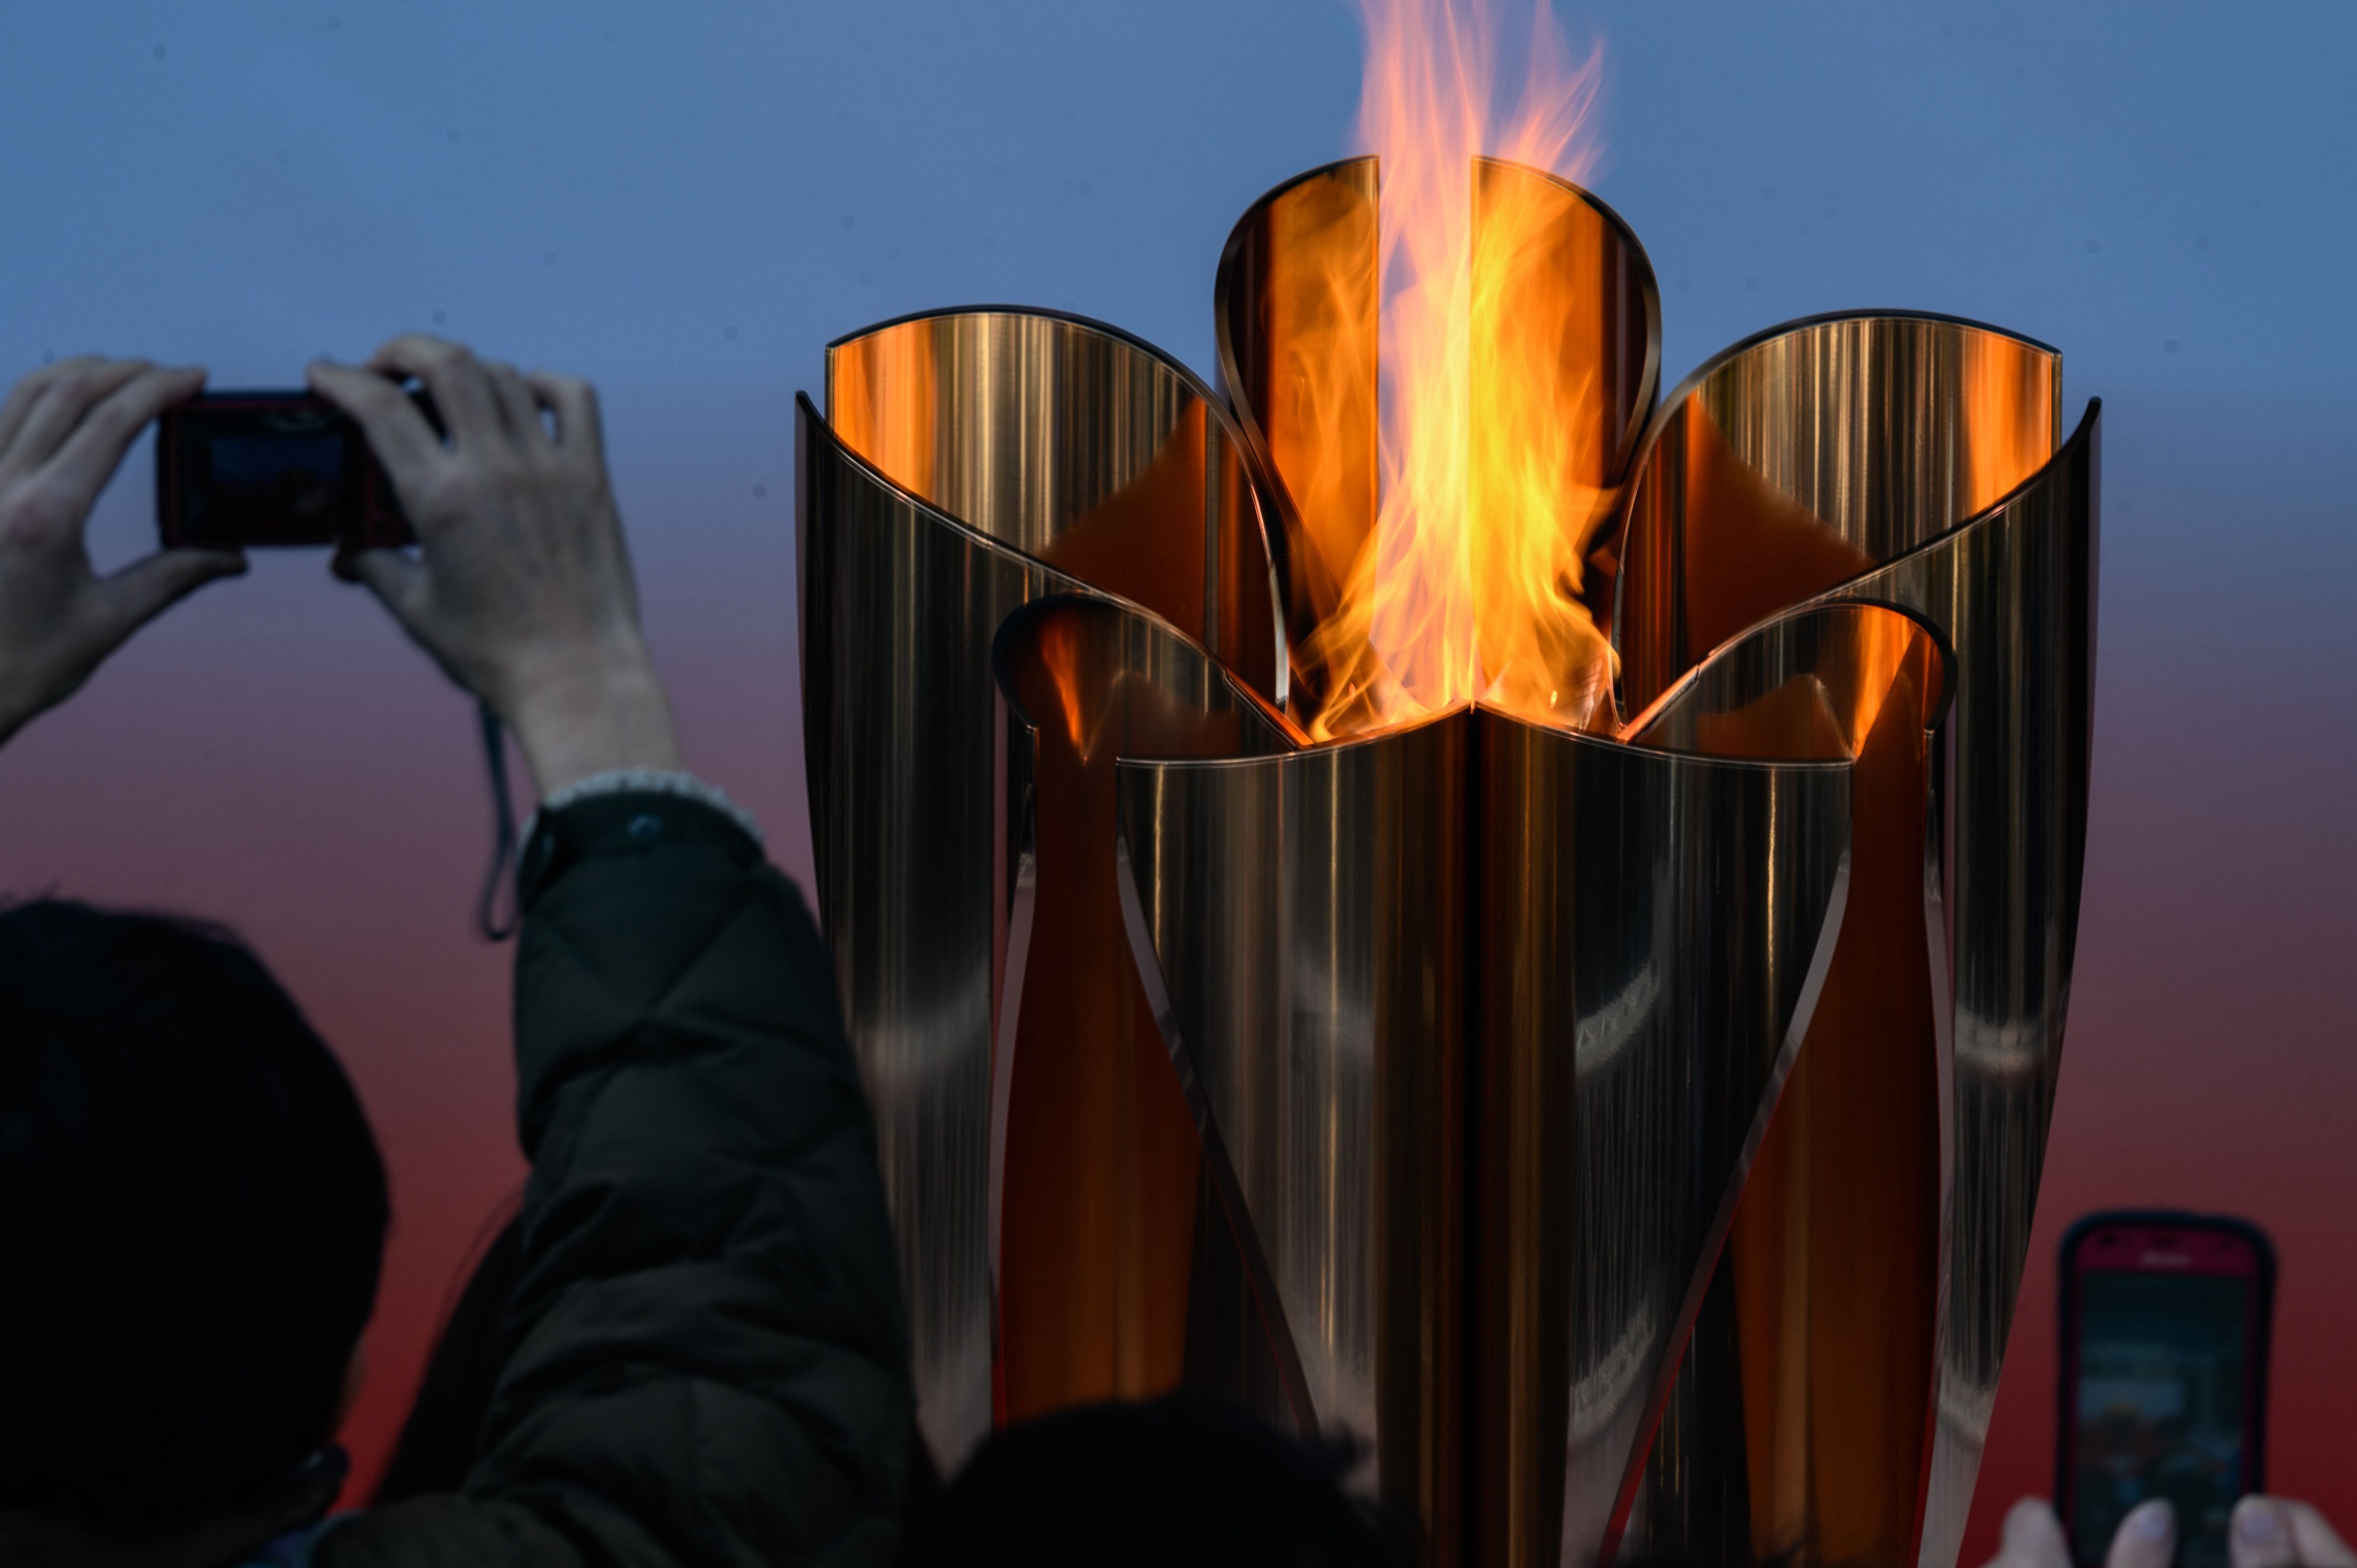 The Tokyo 2020 Olympic flame is displayed outside Sendai railway station, Miyagi prefecture on March 21, 2020, after arriving from Greece. (Credit: AFP)